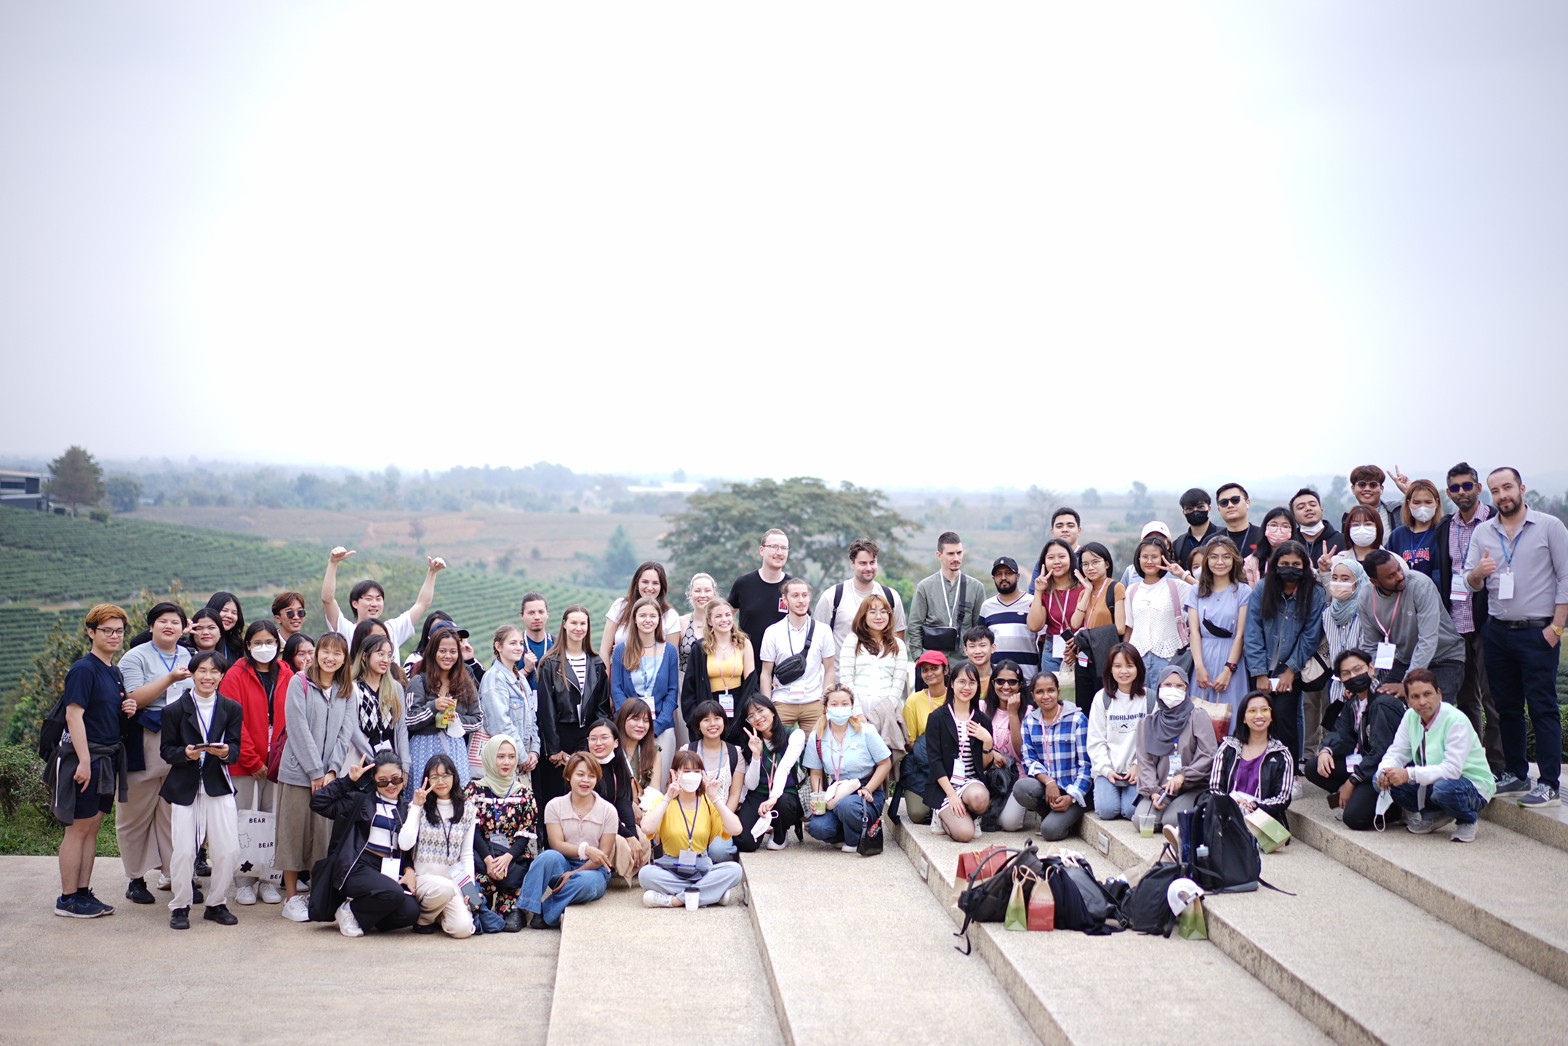 The 1st Round of Chiang Rai Discovery: Exploring Chiang Rai’s History While Making New Friends 